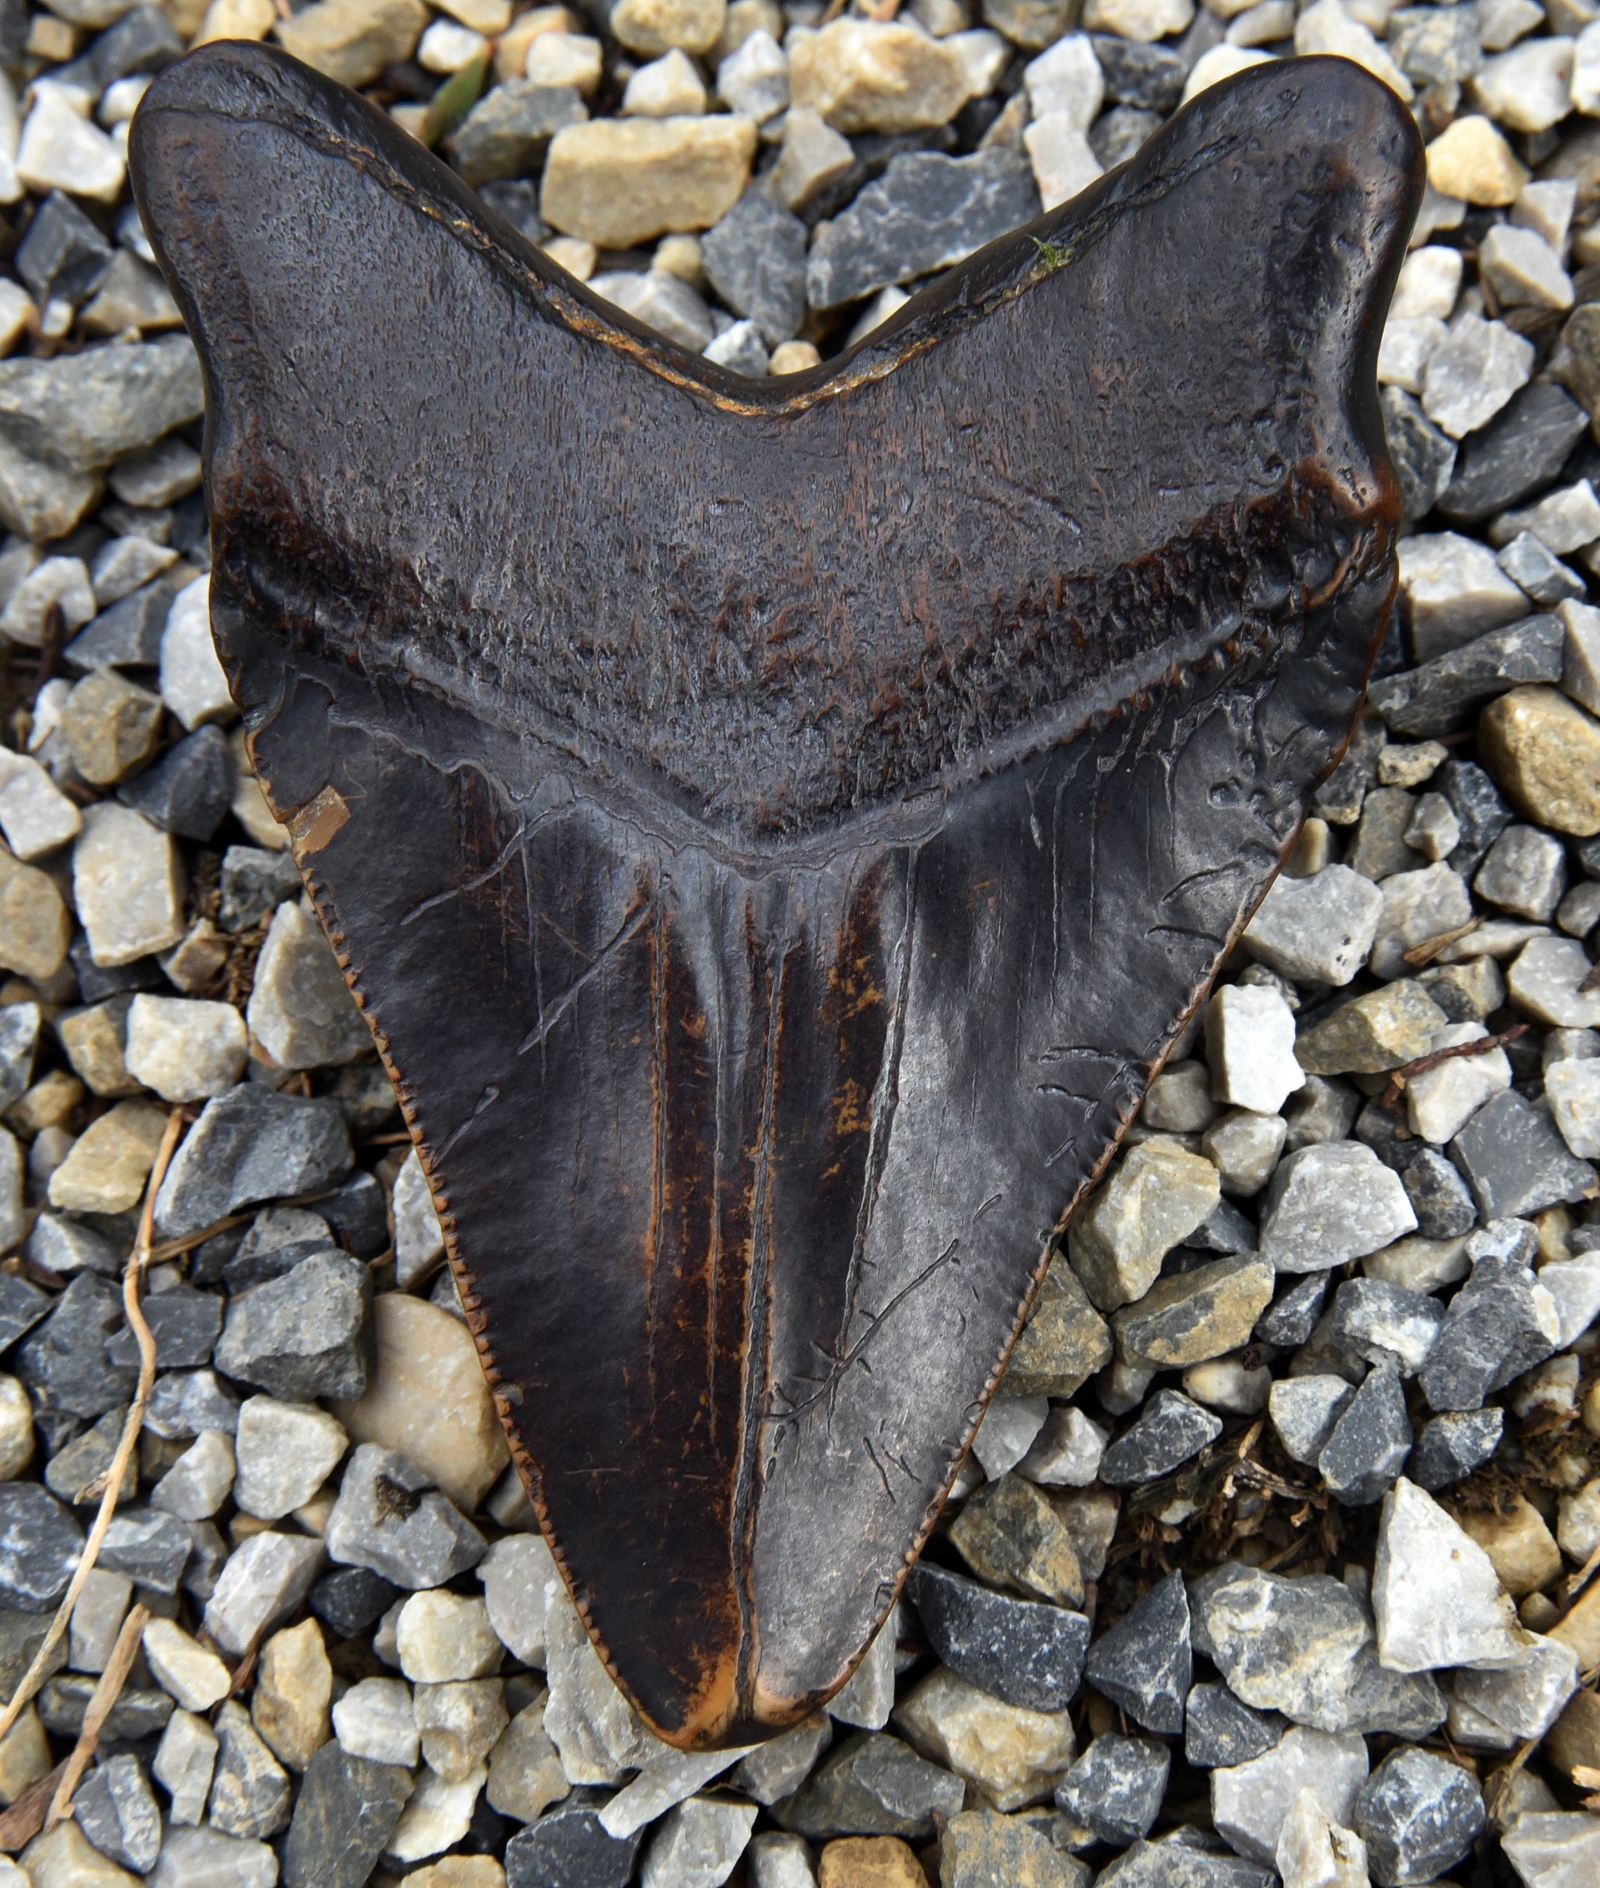 Megalodon shark tooth discovered in Croatia [Photos]